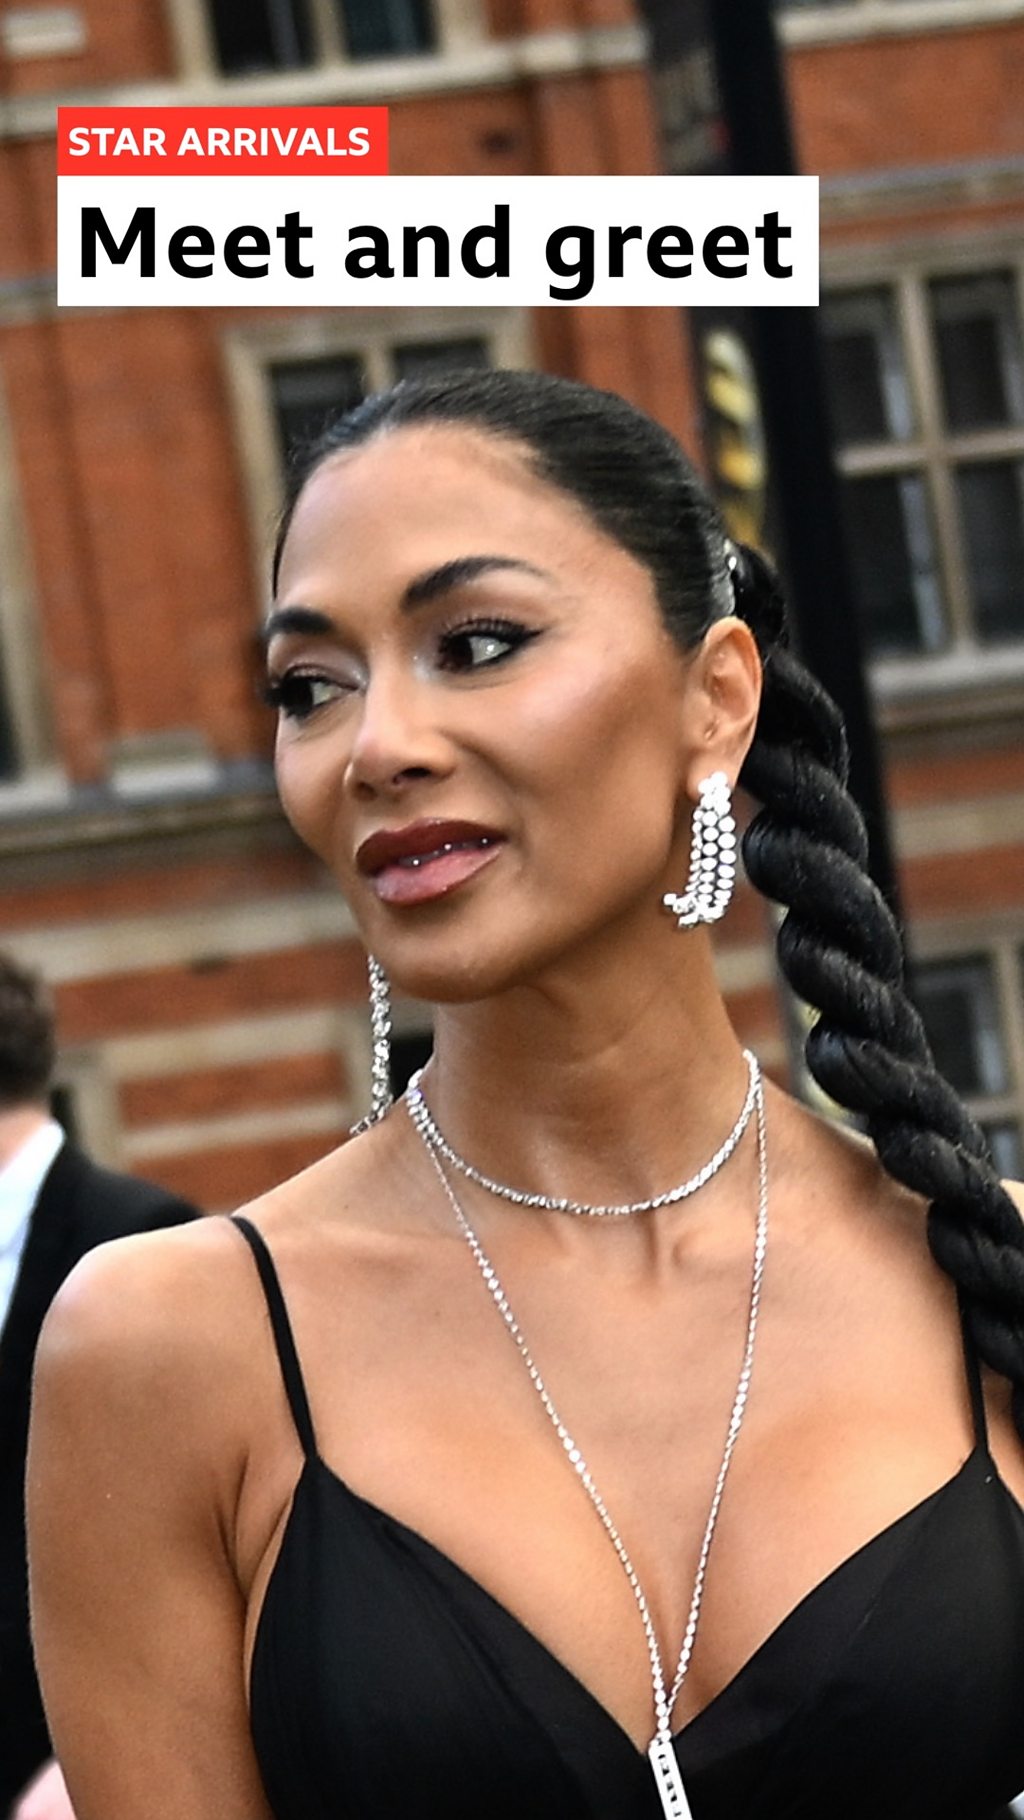 Nicole Sherzinger in a black dress with a silver necklace